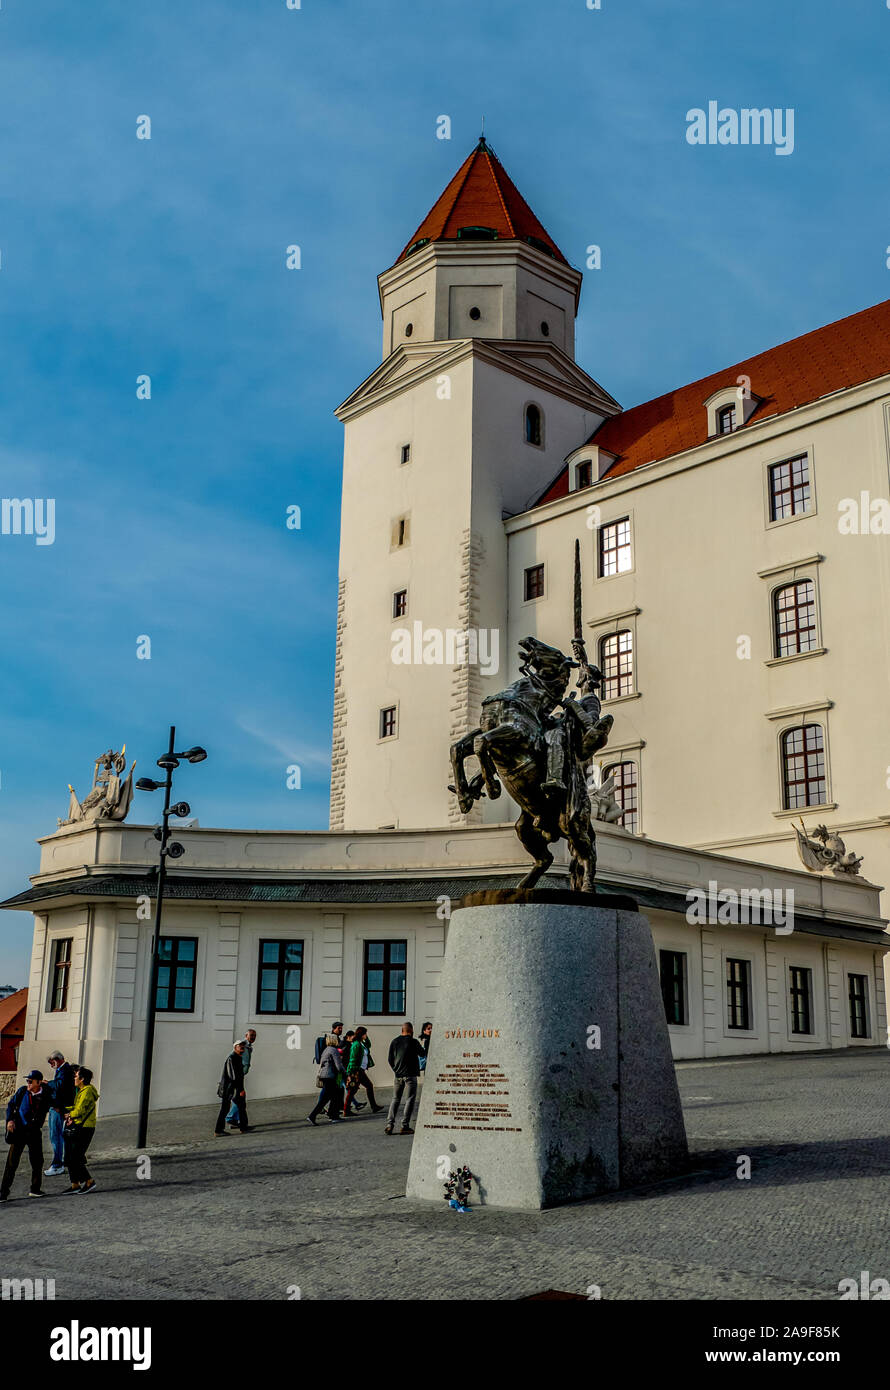 A view of a tower of Bratislava Castle on the hilltop of Bratislava, Slovakia Stock Photo